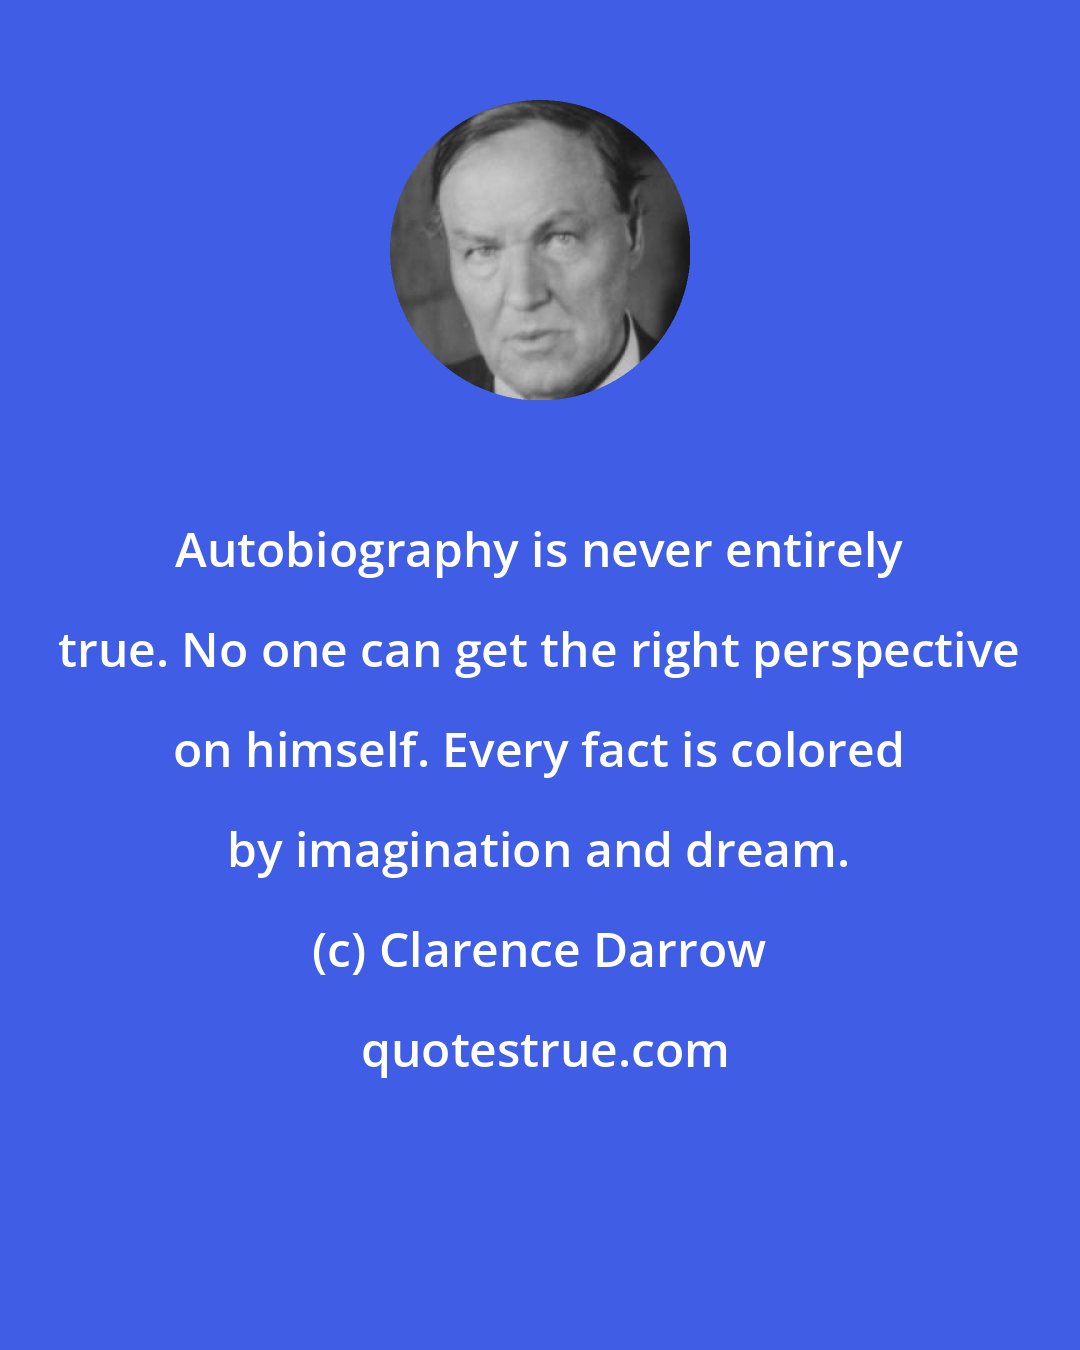 Clarence Darrow: Autobiography is never entirely true. No one can get the right perspective on himself. Every fact is colored by imagination and dream.